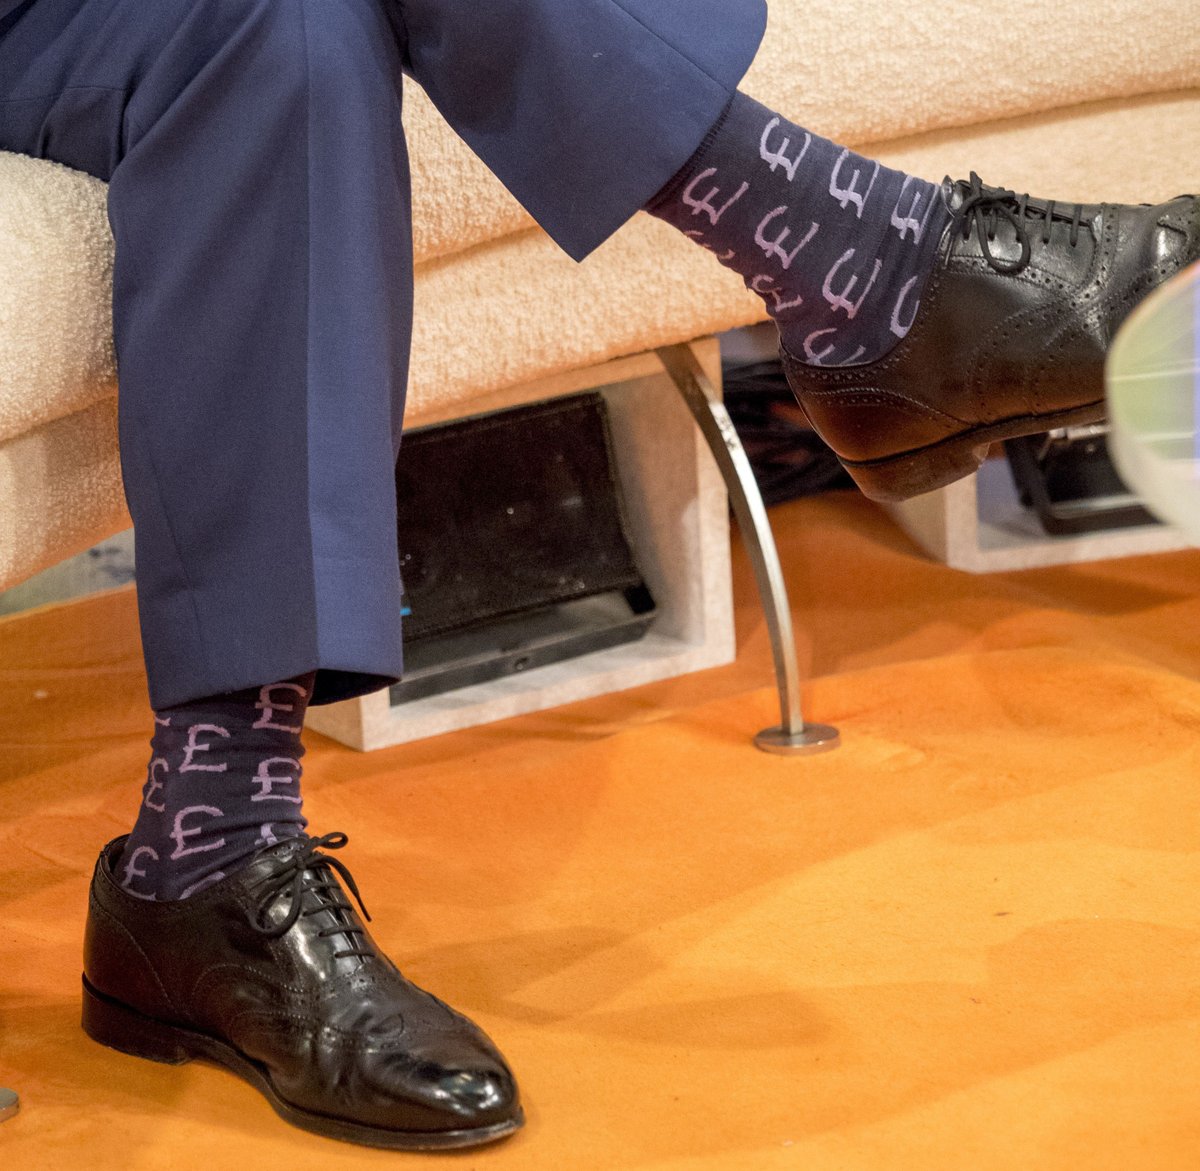 So, about @Nigel_Farage's socks this morning... Watch the interview: itv.com/goodmorningbri…